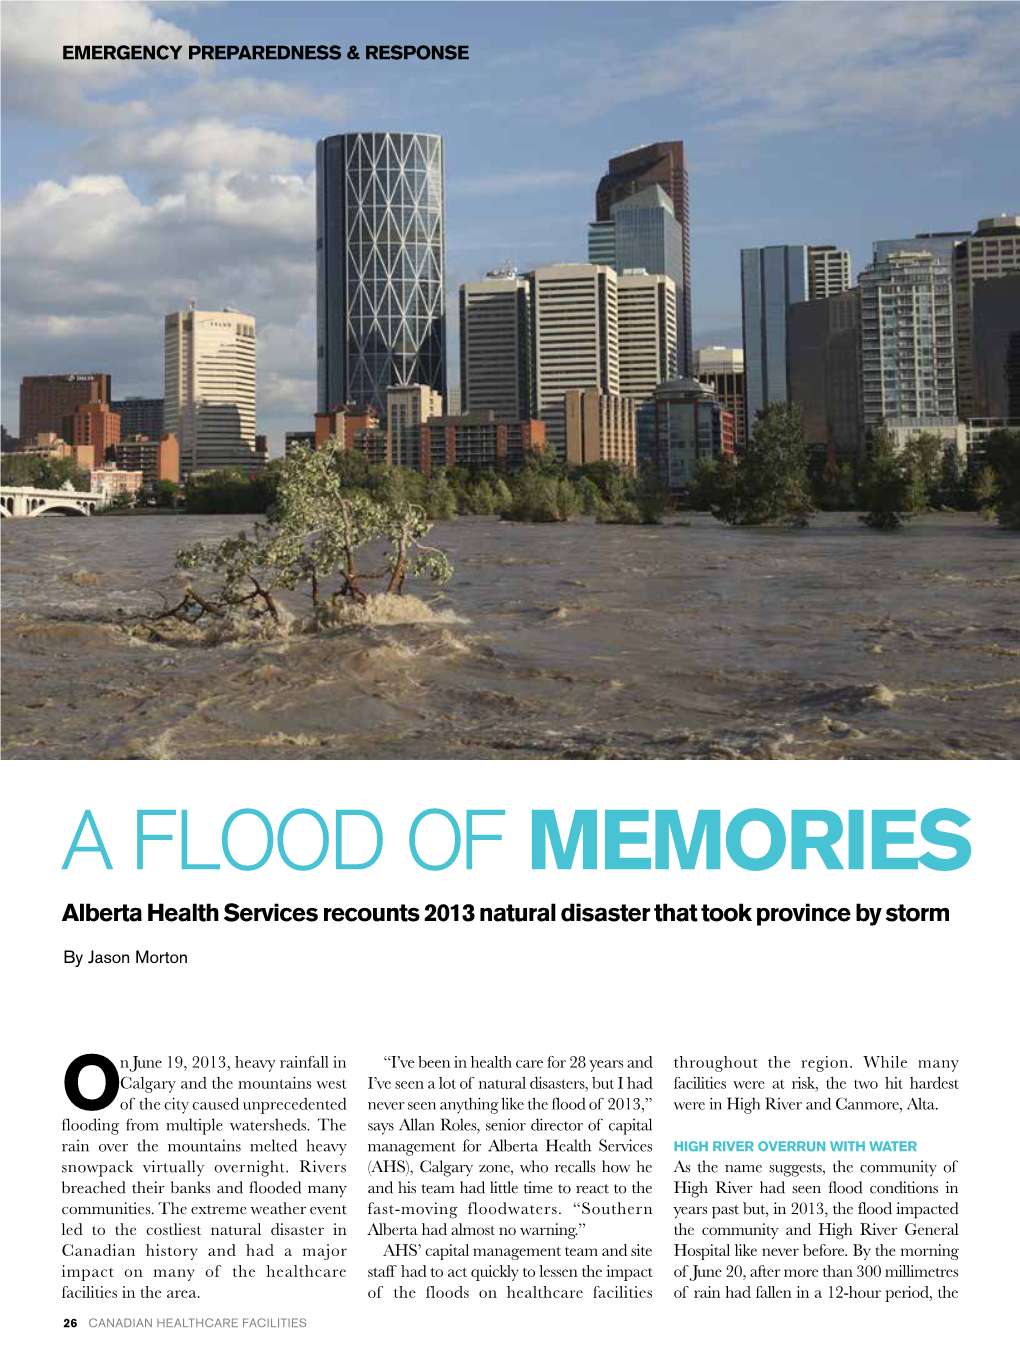 A FLOOD of MEMORIES Alberta Health Services Recounts 2013 Natural Disaster That Took Province by Storm